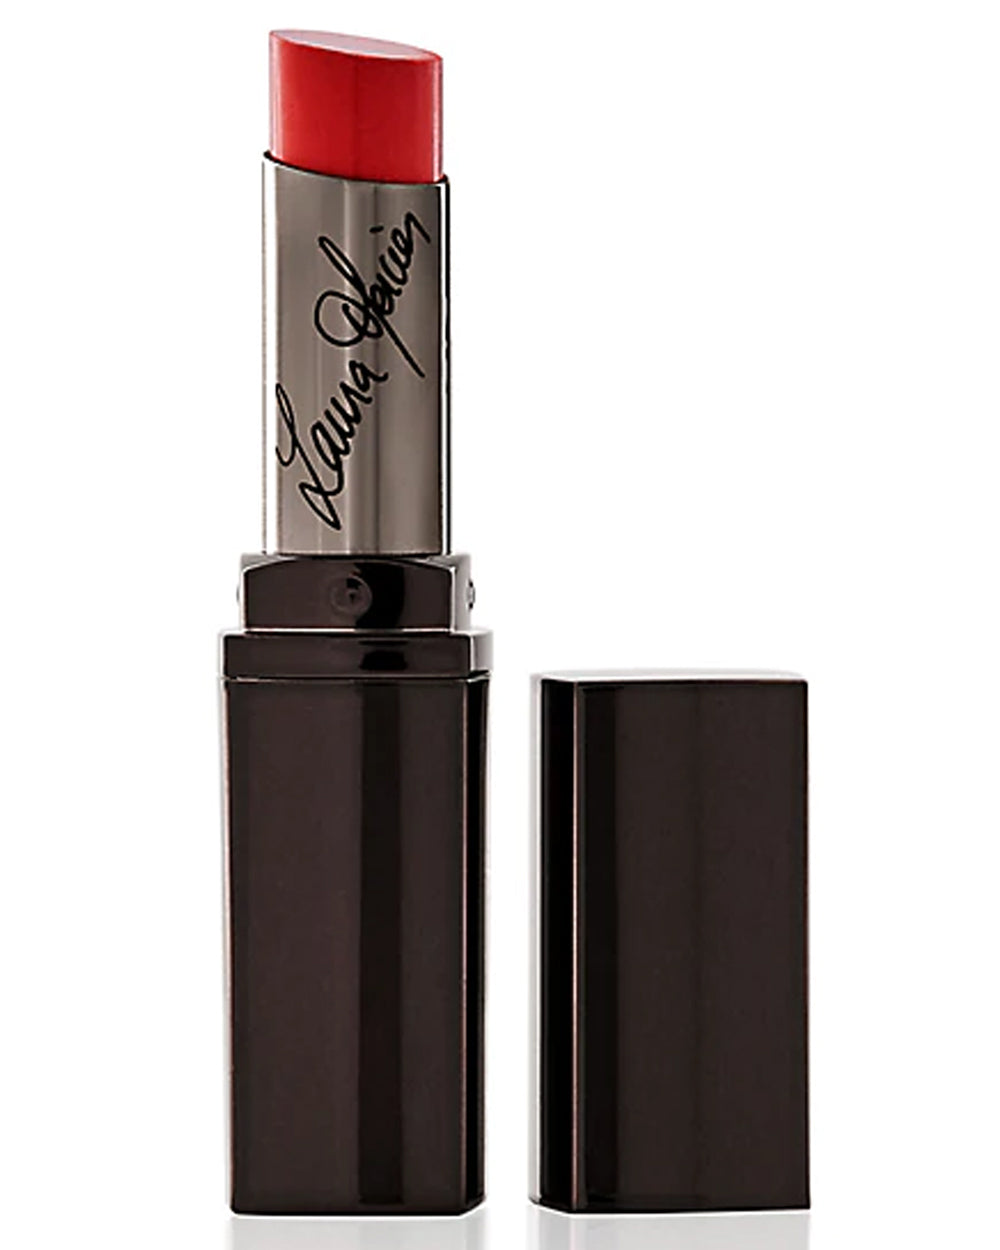 Lip Parfait Creamy Colorbalm in Cherry-on-Top